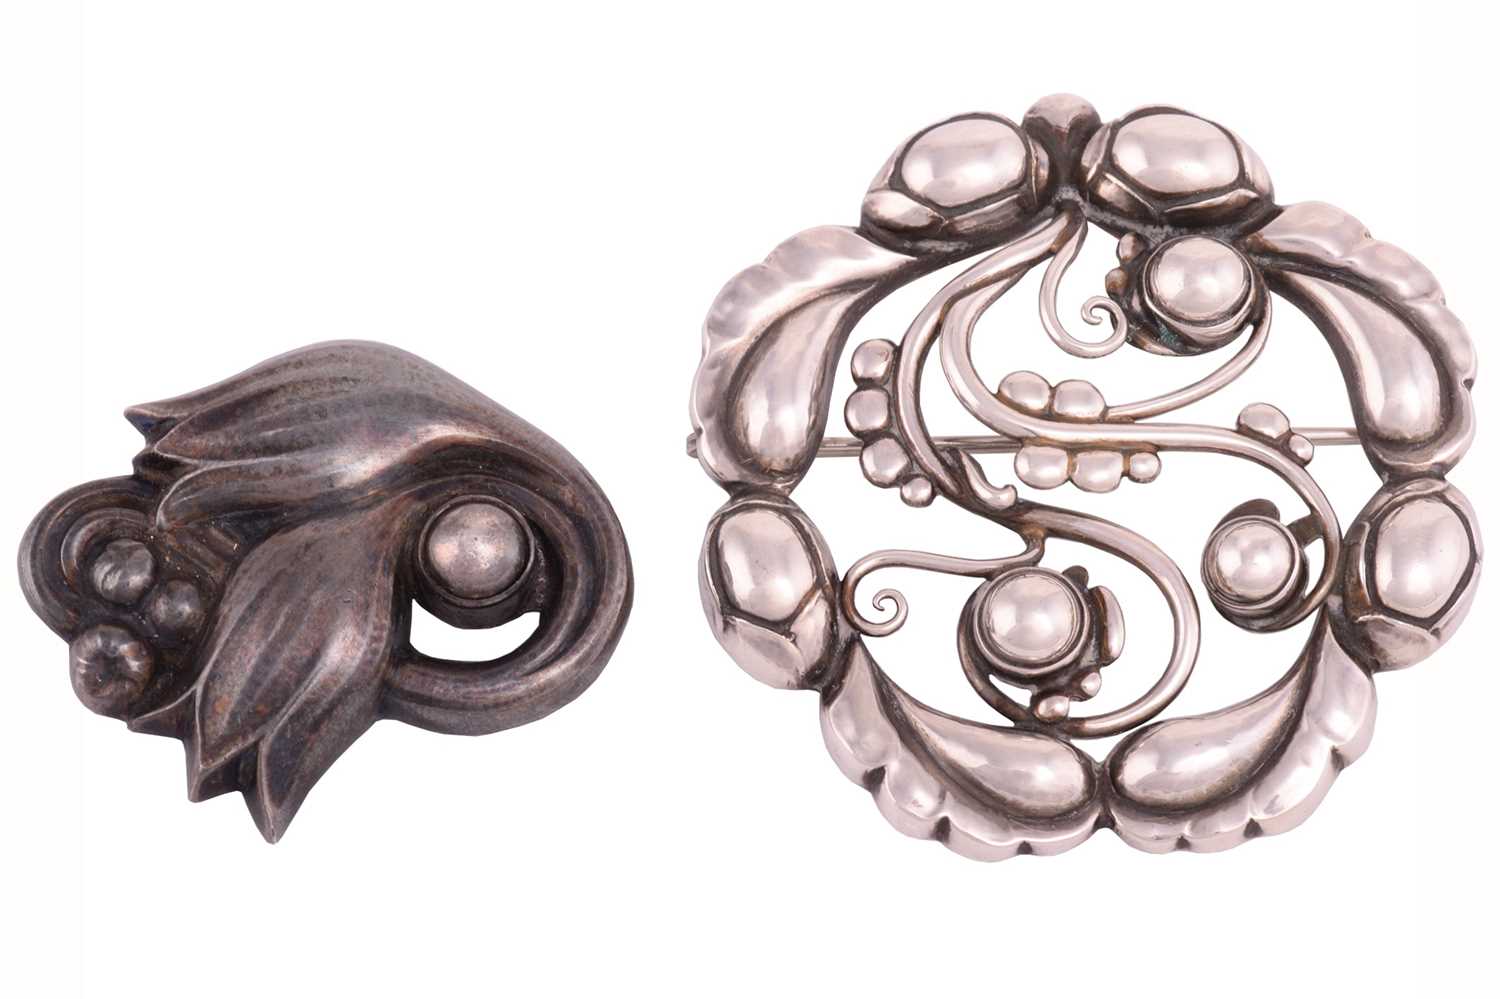 Georg Jensen - a tulip brooch and an openwork foliate brooch; the tulip brooch collet-set with a